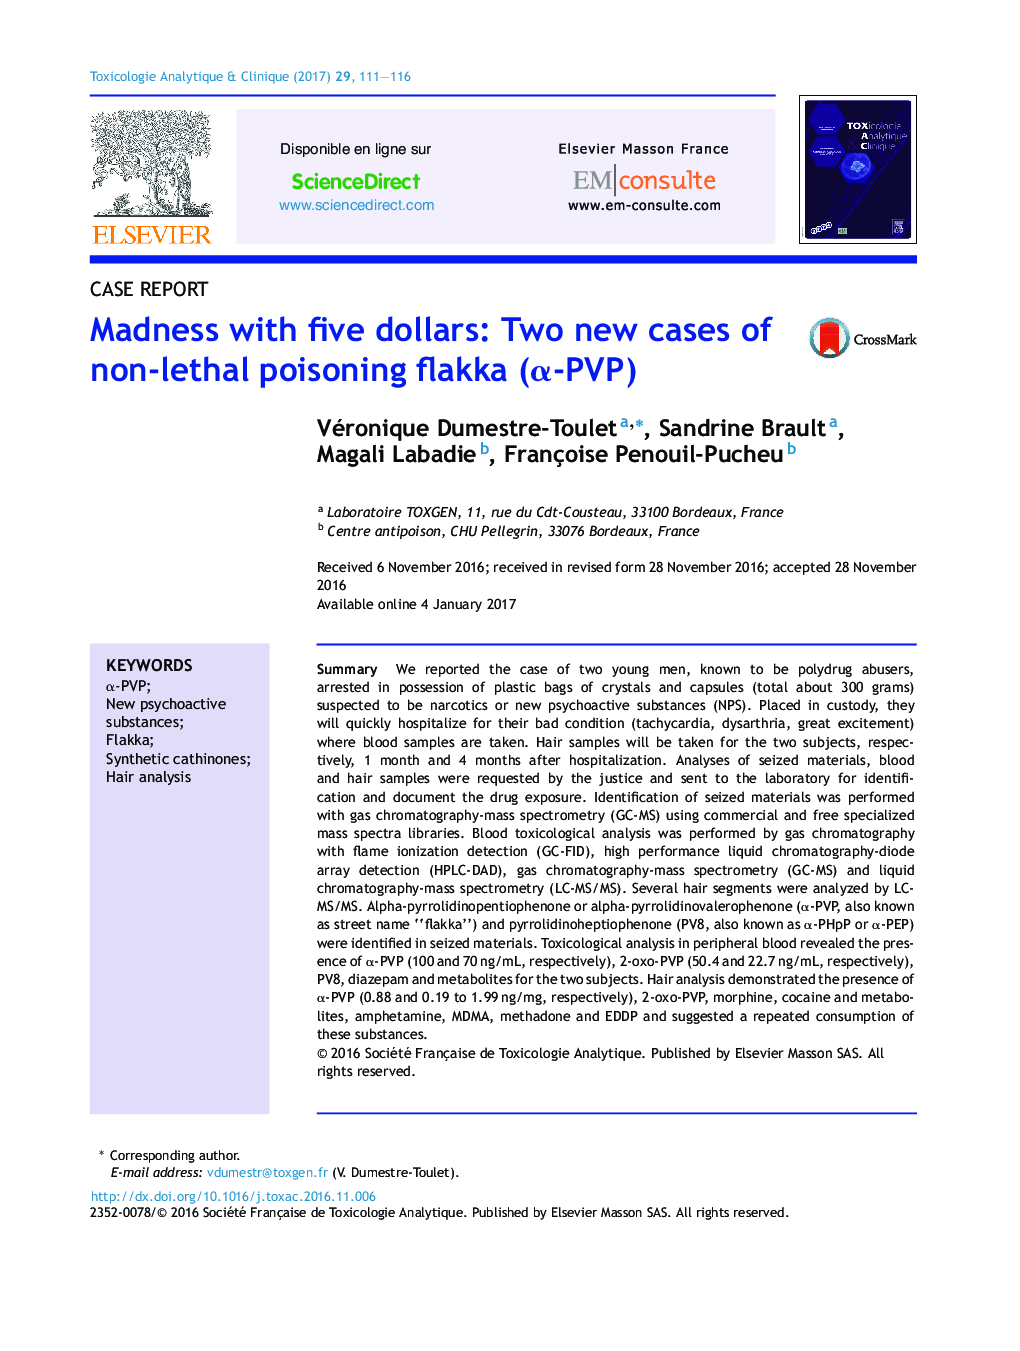 Case reportMadness with five dollars: Two new cases of non-lethal poisoning flakka (Î±-PVP)